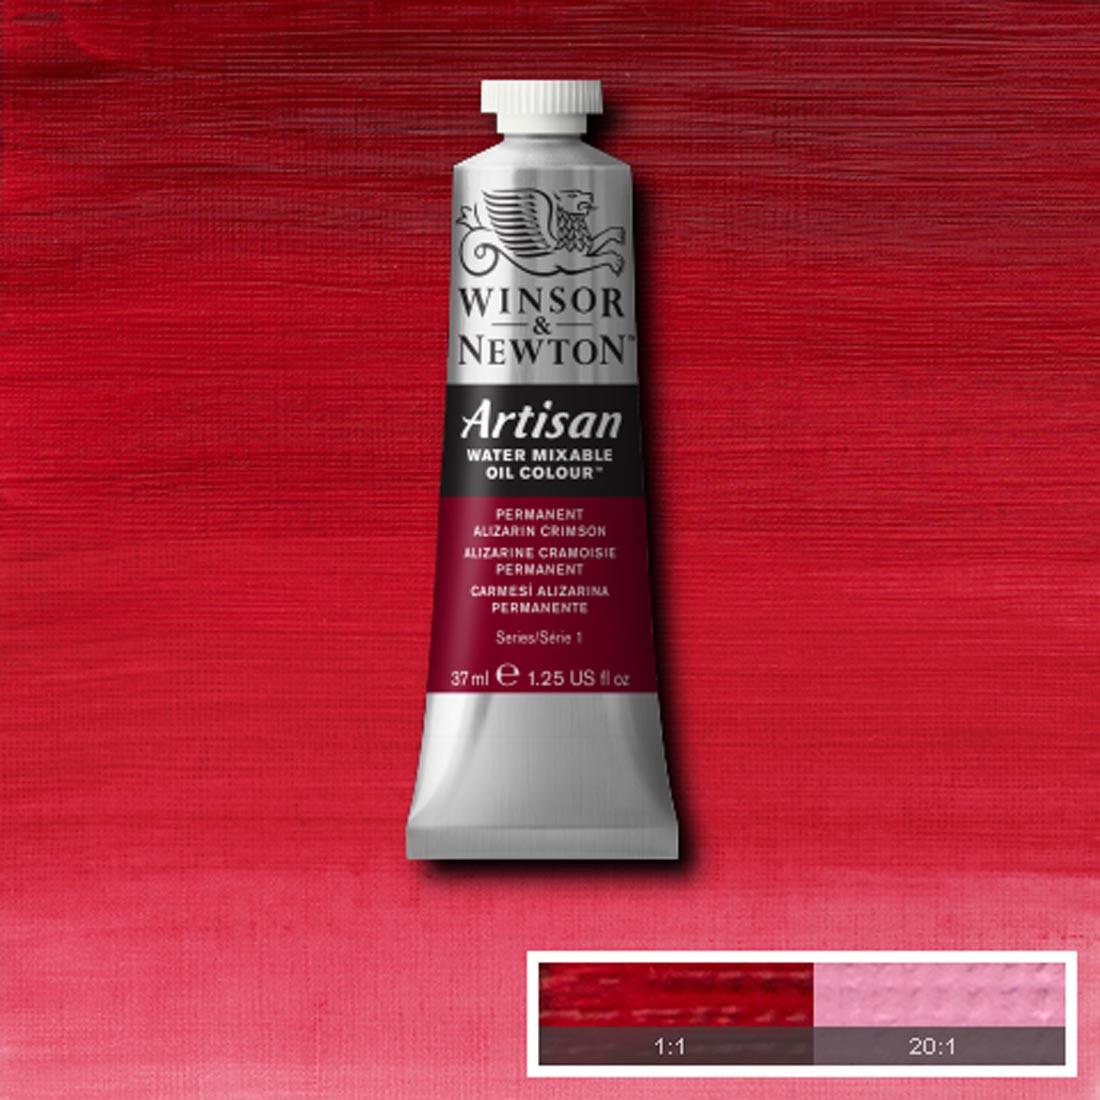 Tube of Permanent Alizarin Crimson Winsor & Newton Artisan Water Mixable Oil Colour with a paint swatch for the background